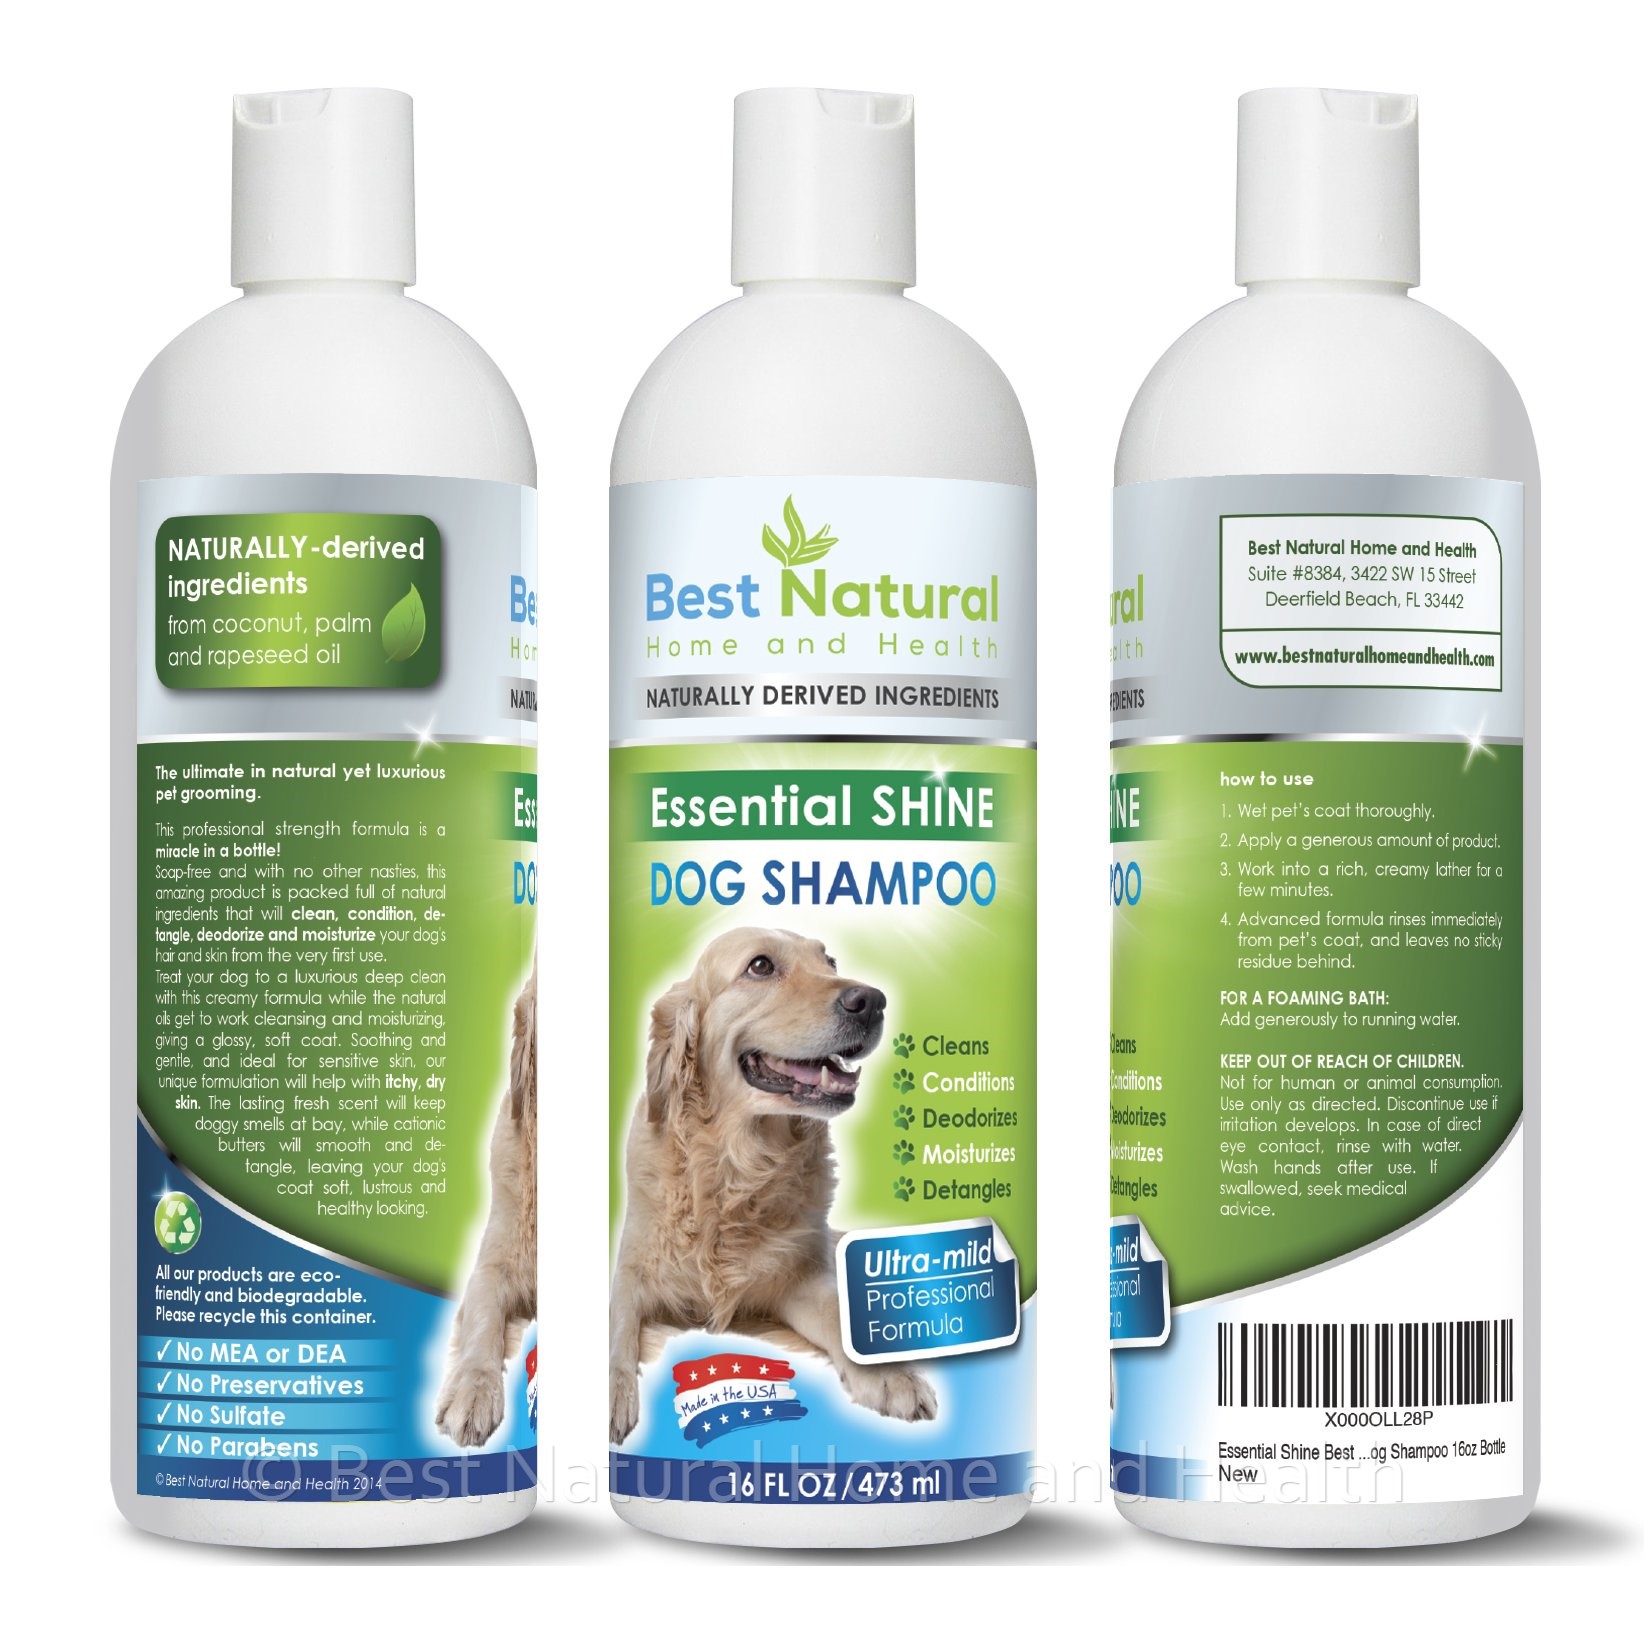 Media From the Heart by Ruth Hill | Essential Shine Dog Shampoo Review